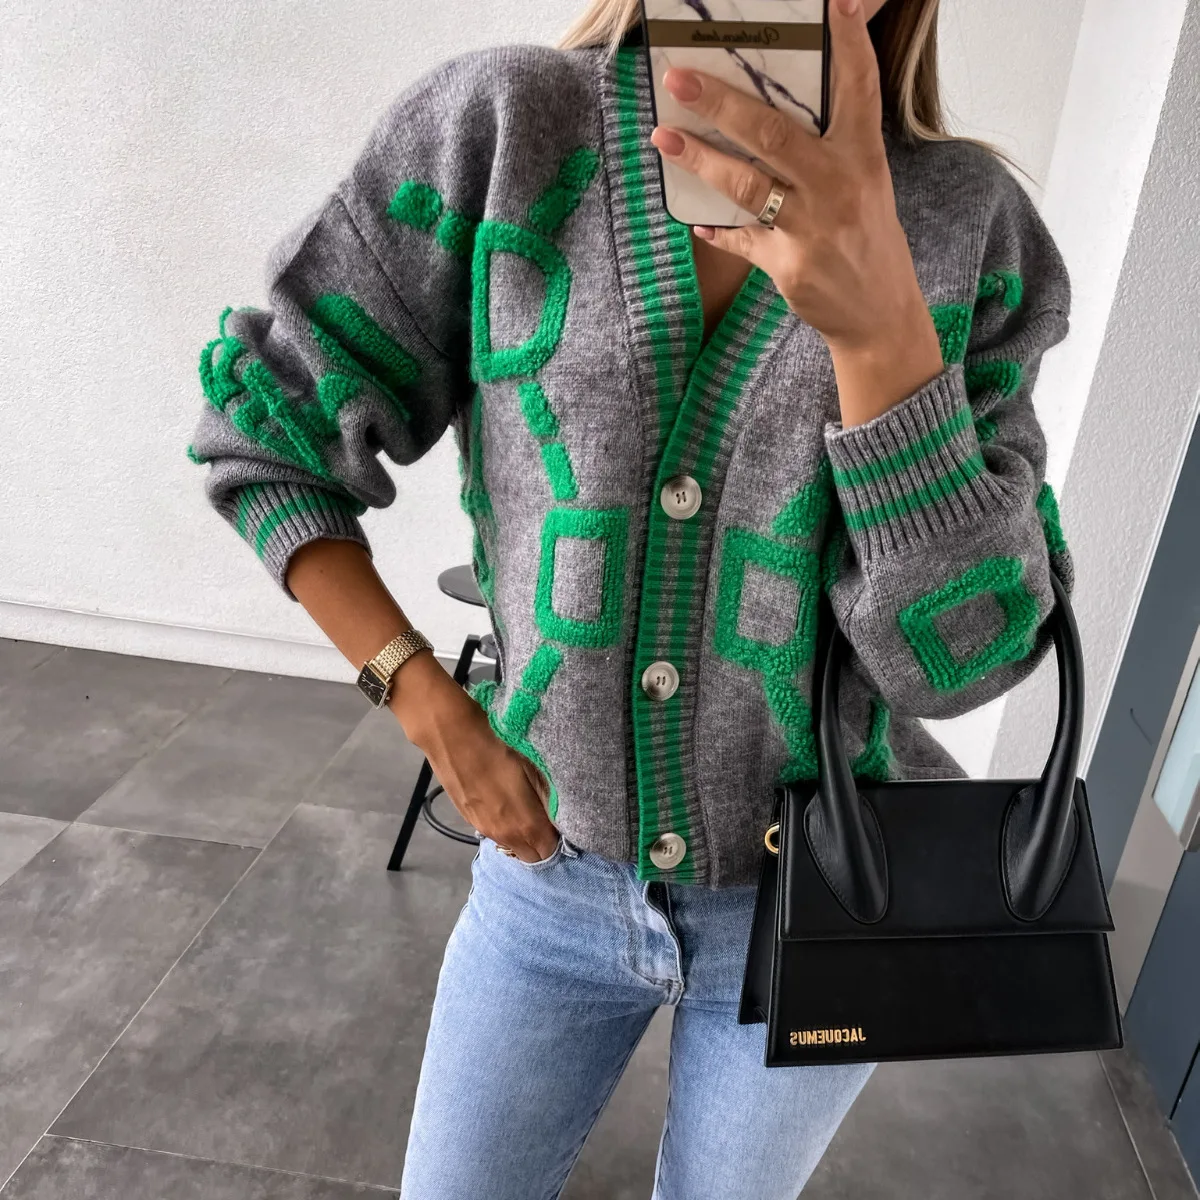 Women Autumn Winter New Loose Knitted Cardiagn Casual  V-neck Drop-shoulder Sleeve Sweater Coat Female Chic Crochet Outerwear